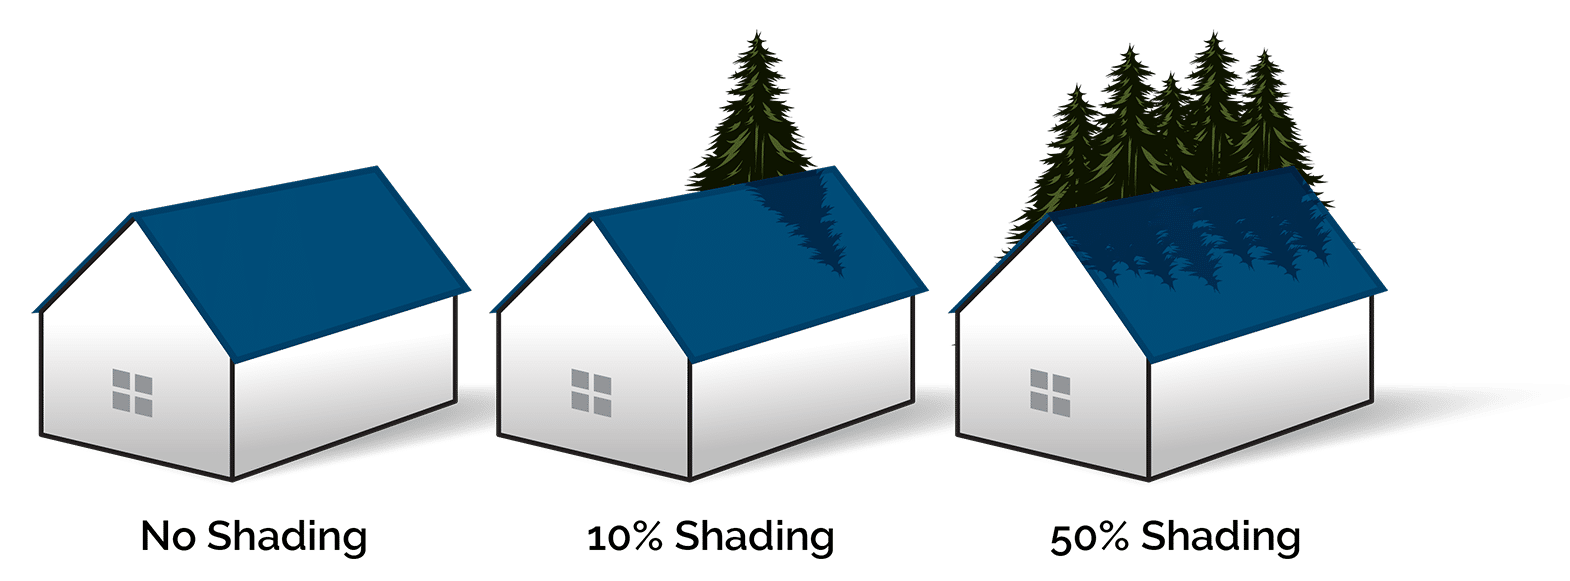 Example of house with shade